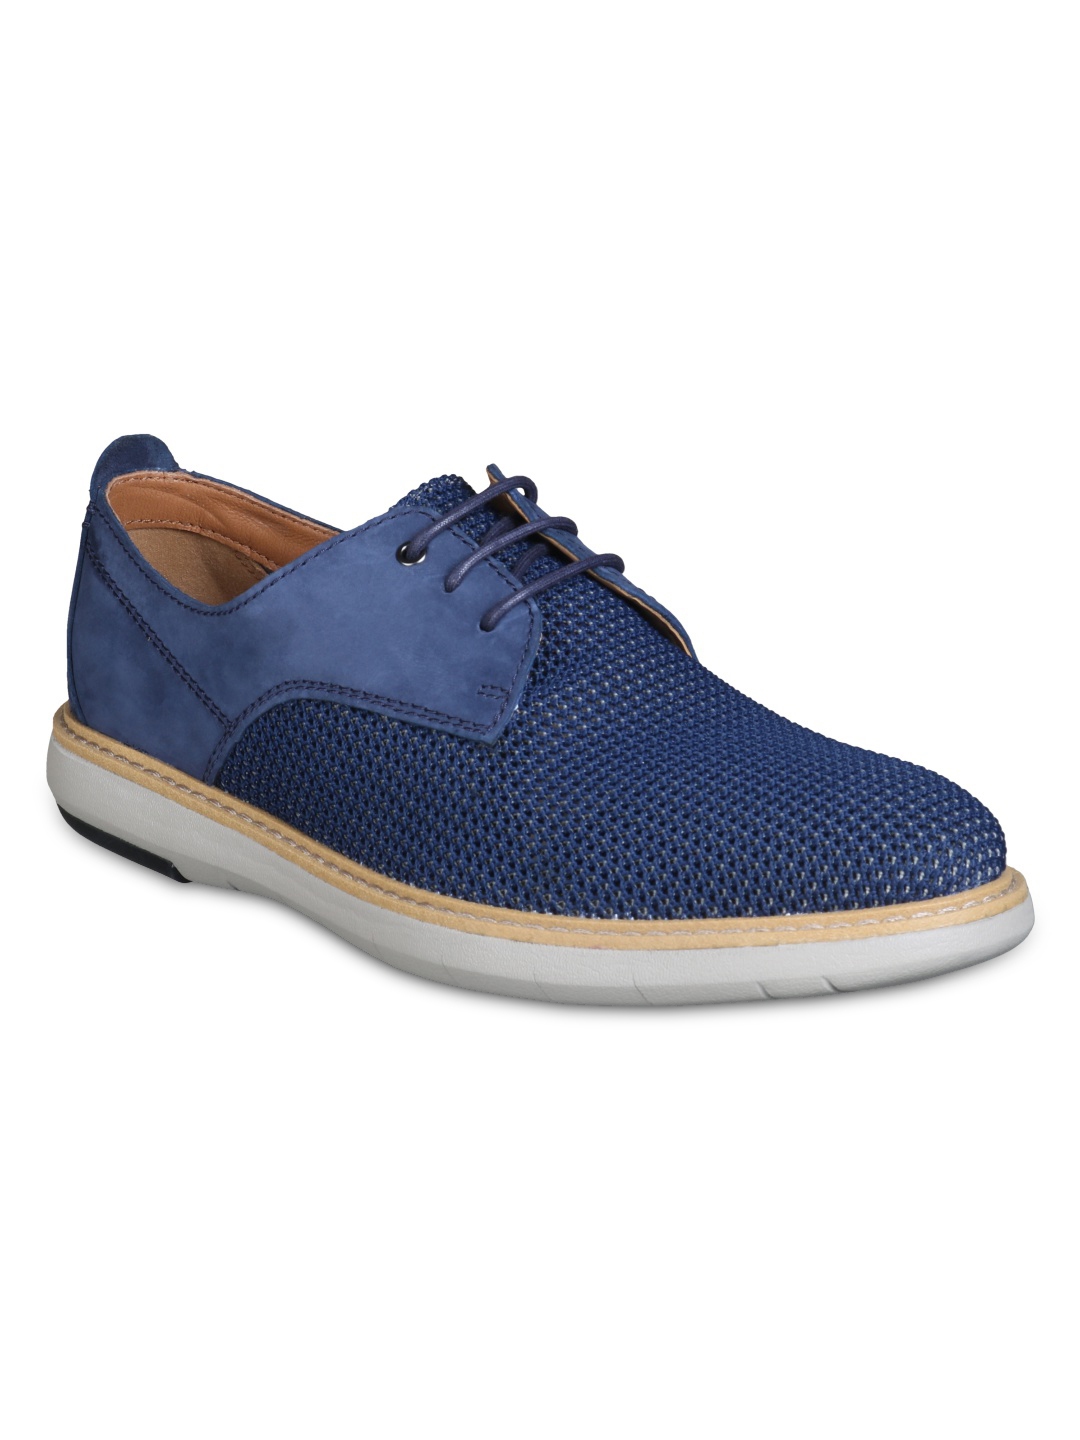 Buy Clarks Men Blue Leather Sneakers Casual Shoes For Men 6545115